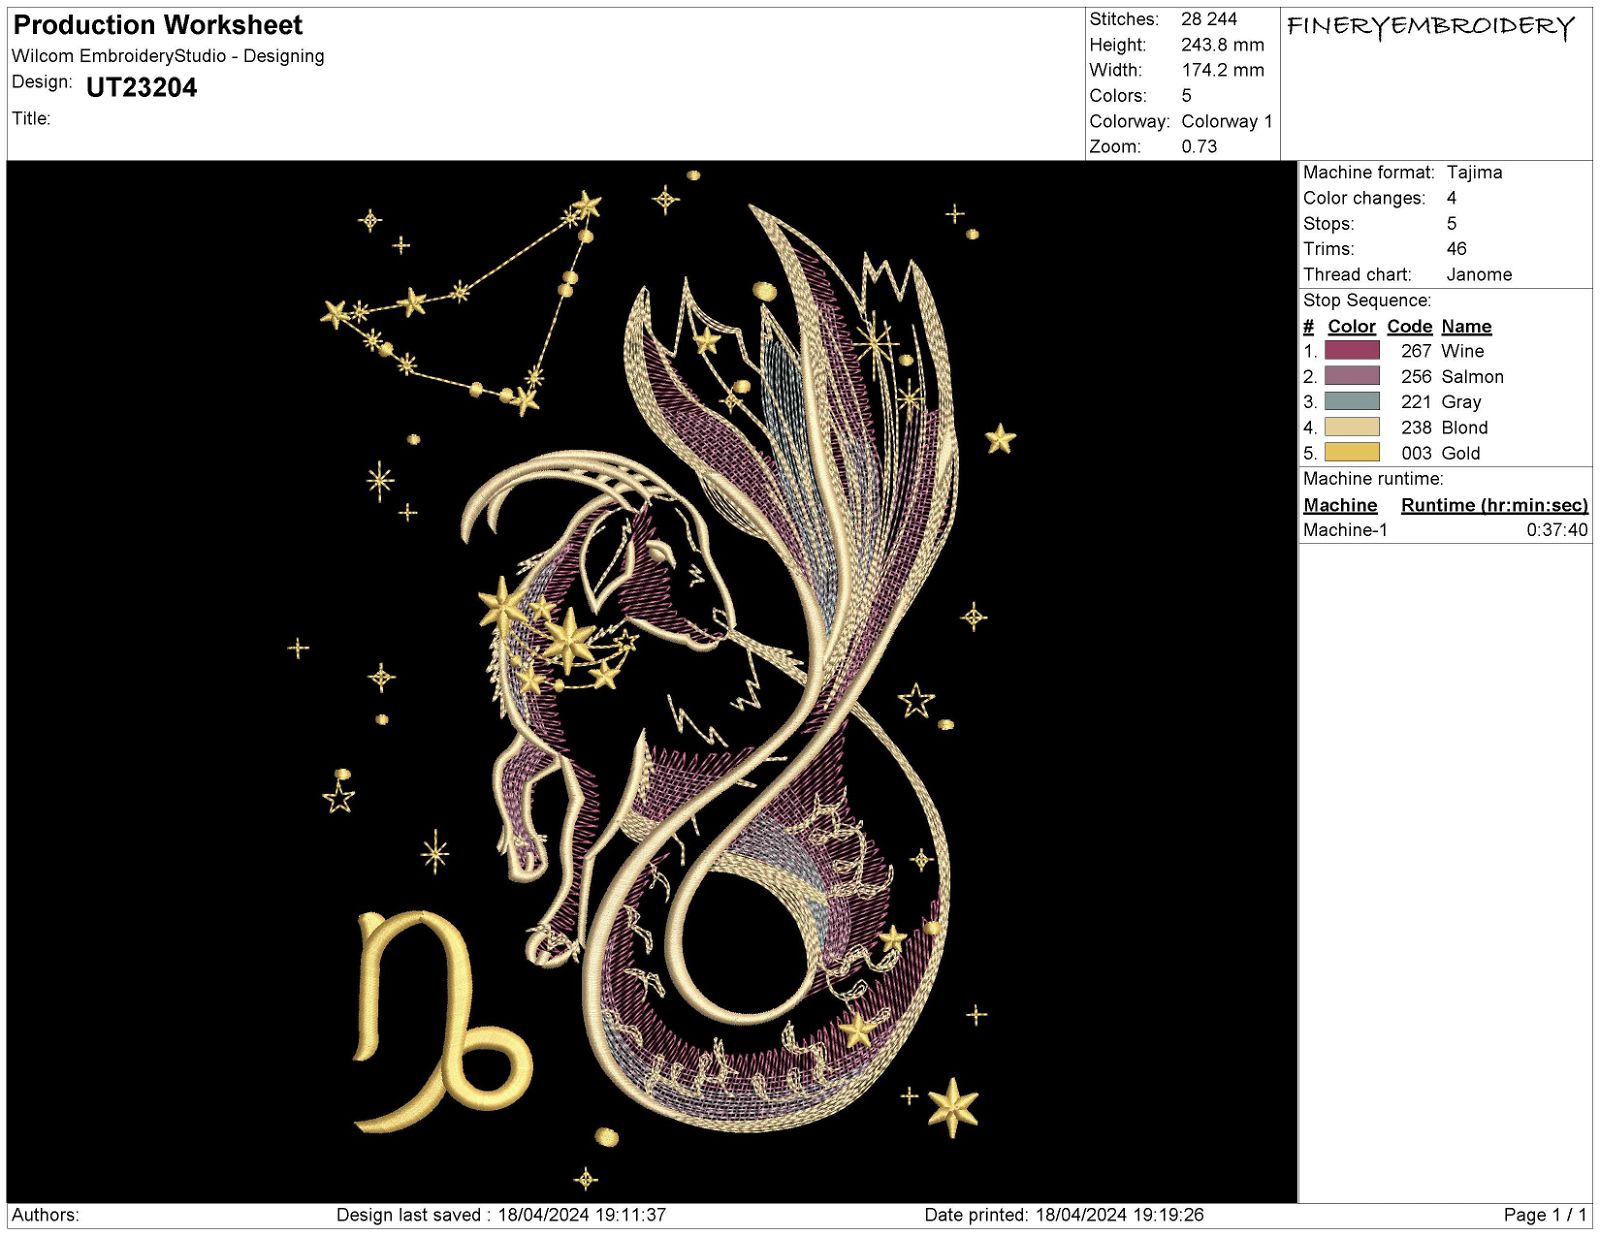 Zodiac-Inspired Embroidery Designs: Exclusive Pack of 12 - FineryEmbroidery